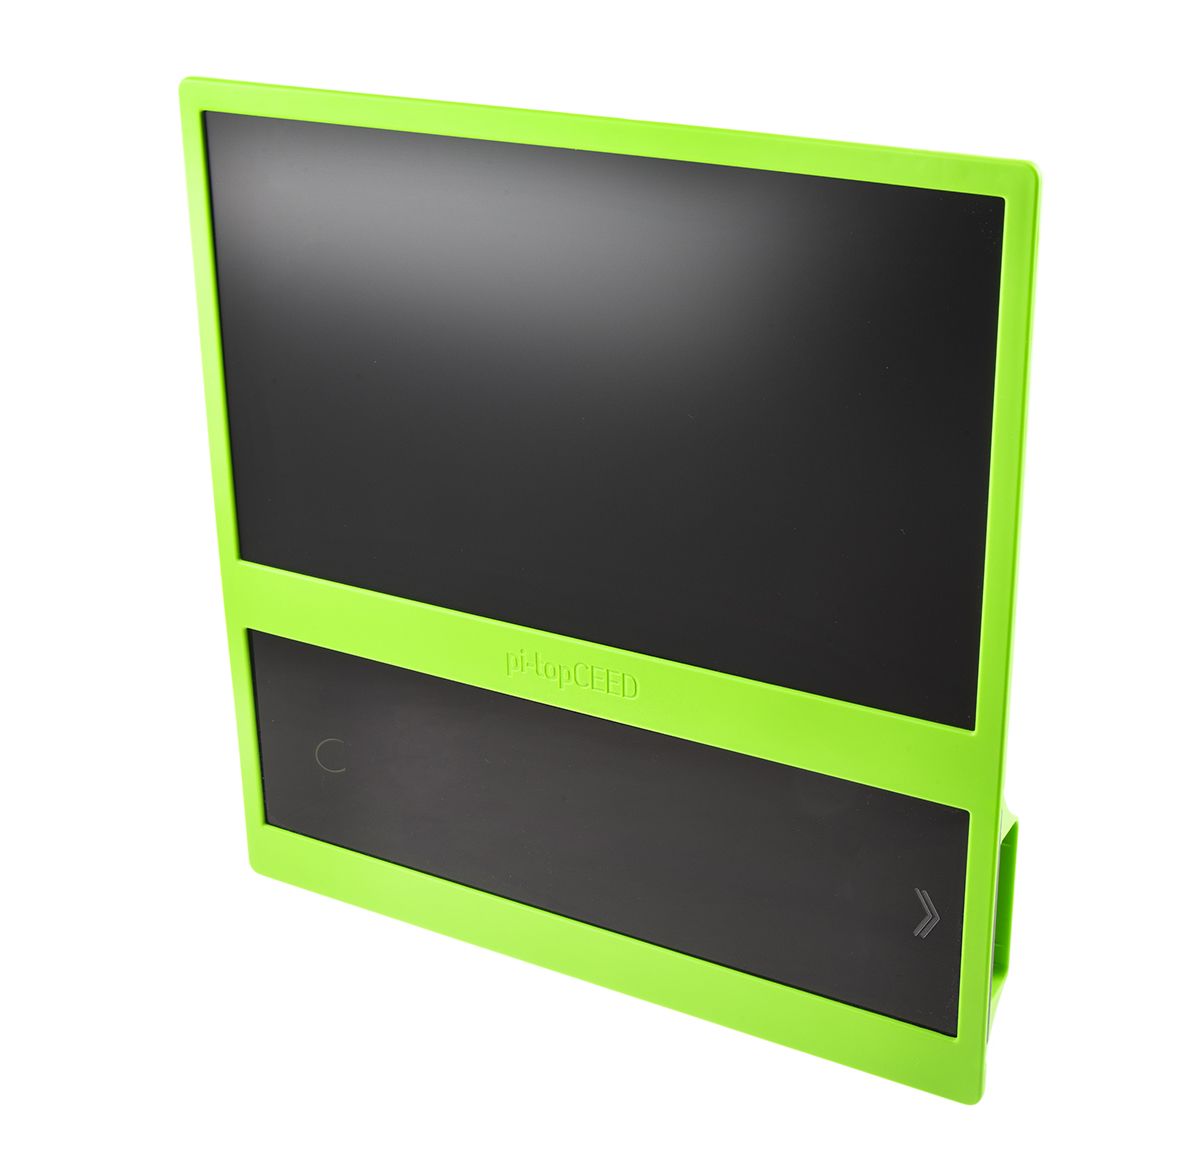 Pi-Top, CEED Pro Green with 14in LCD Display